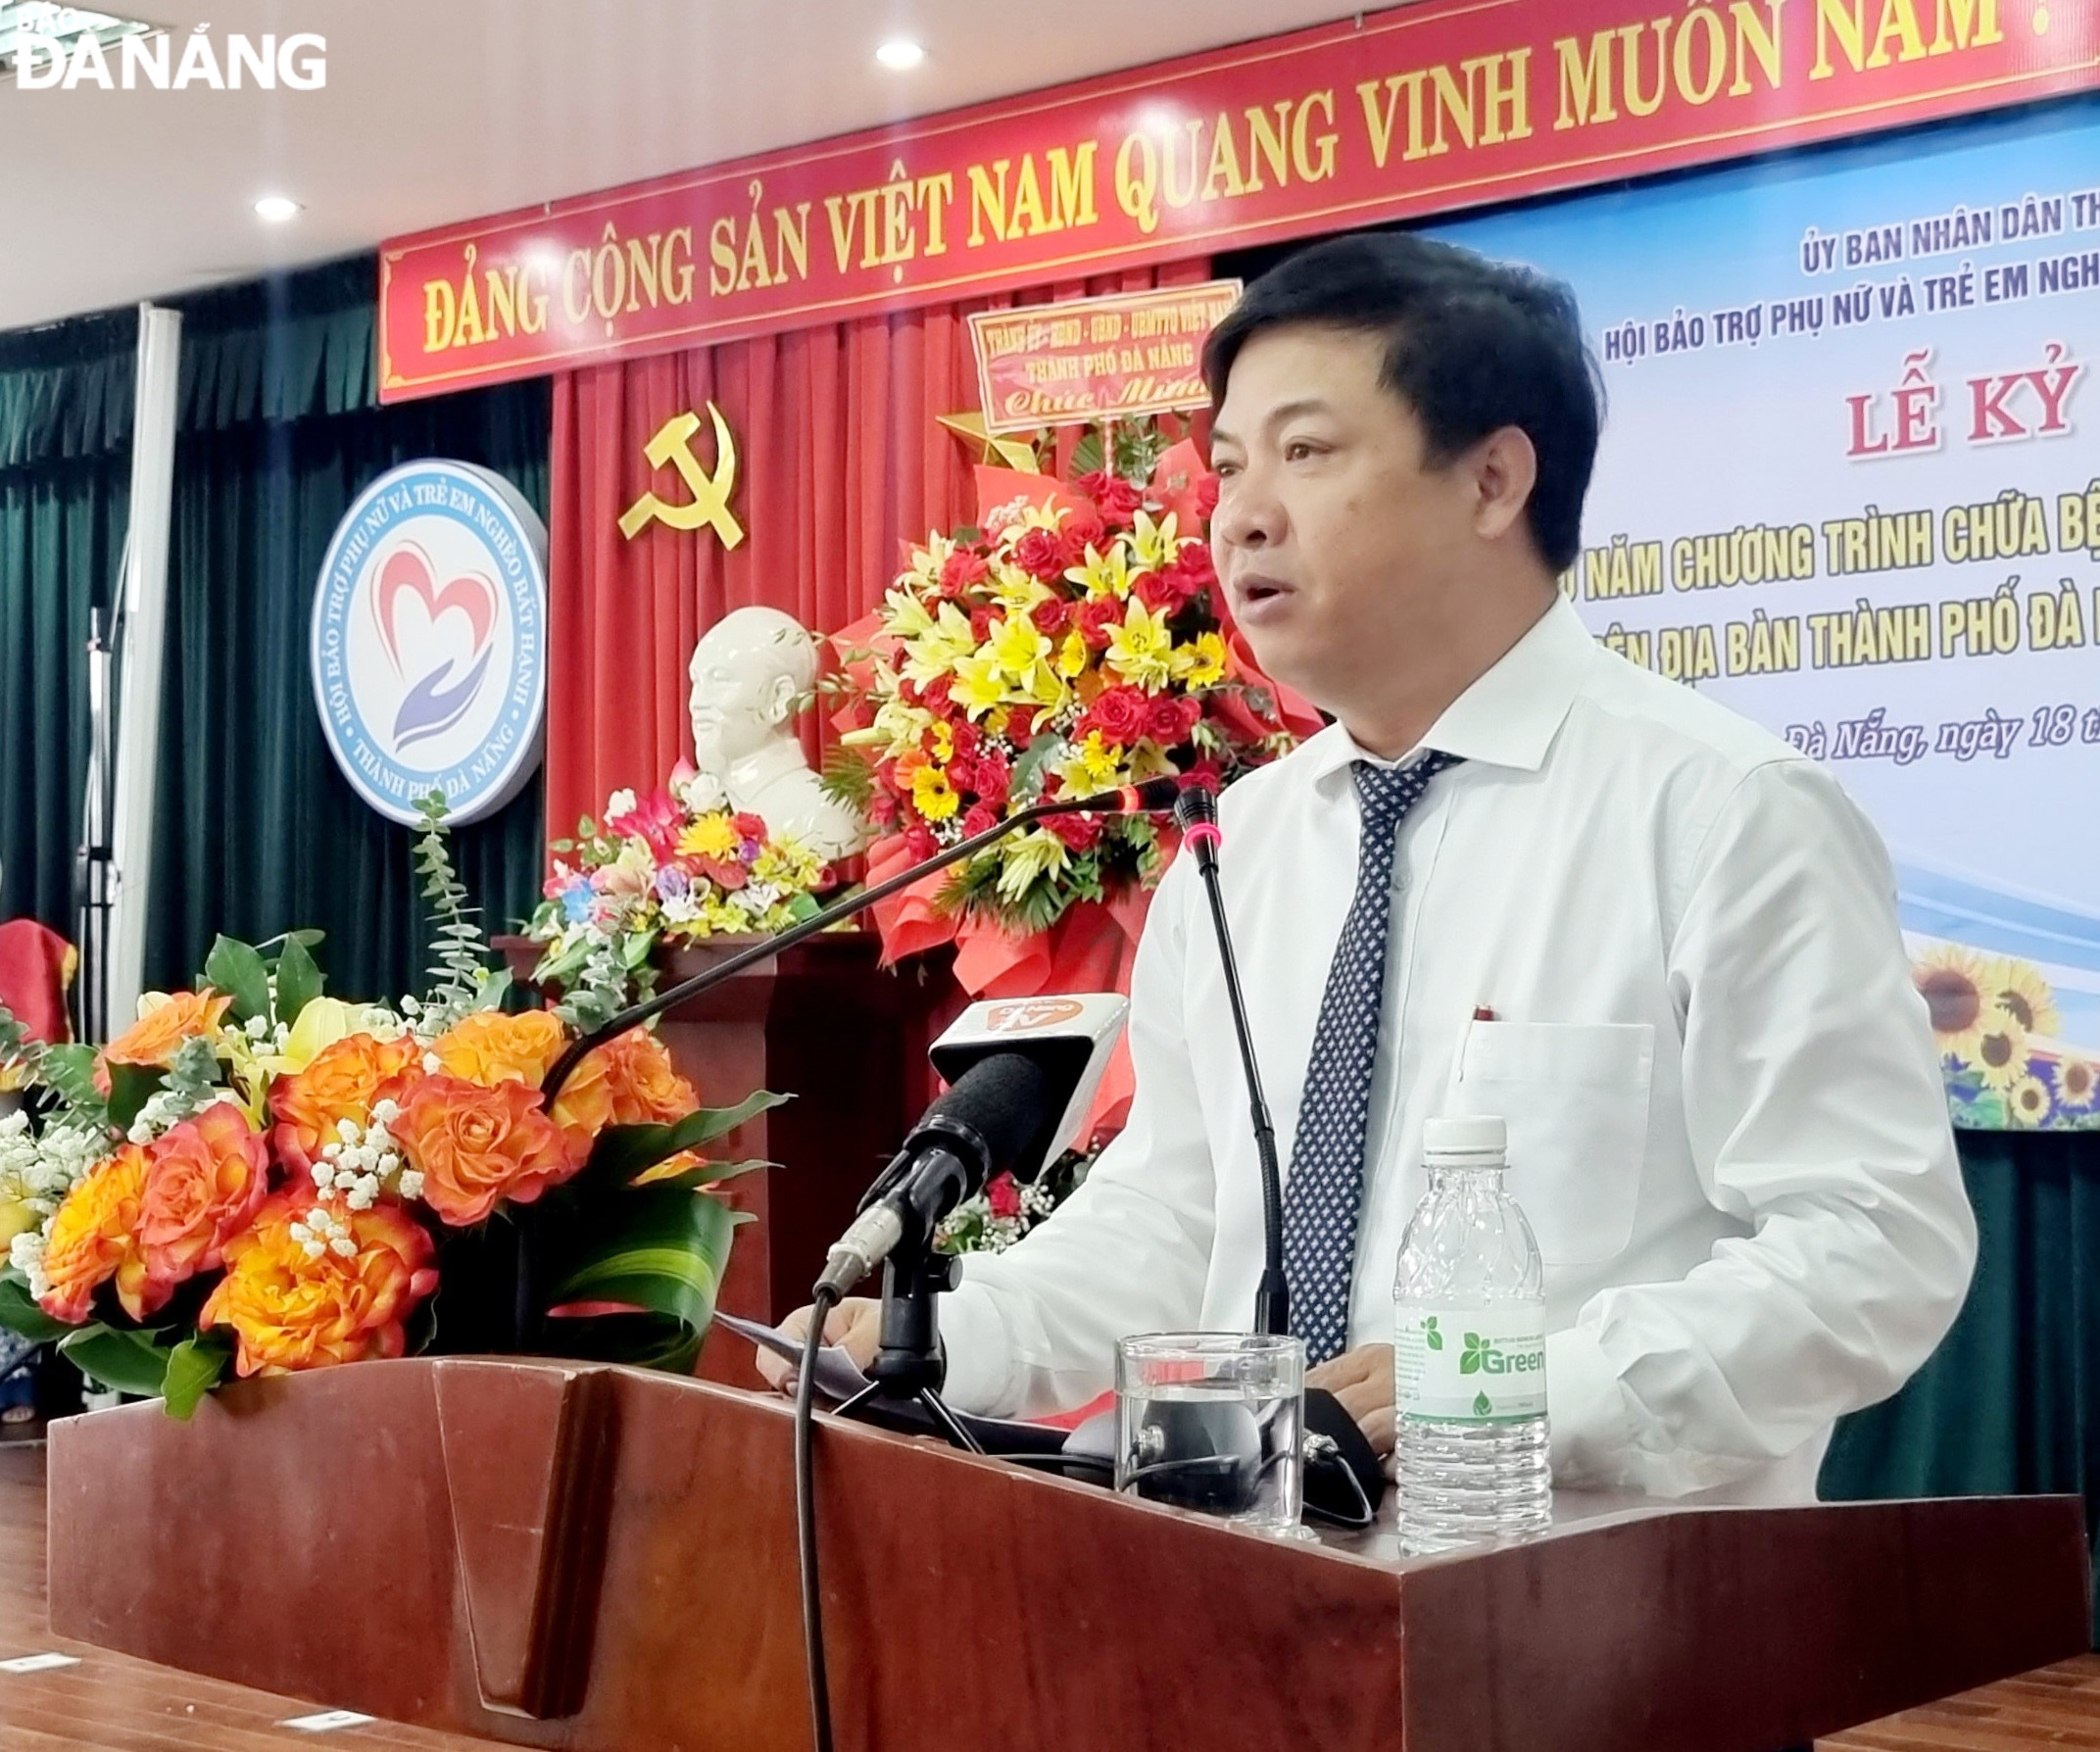 Da Nang Party Committee Deputy Secretary cum People's Council Chairman Luong Nguyen Minh Triet speaking at the event